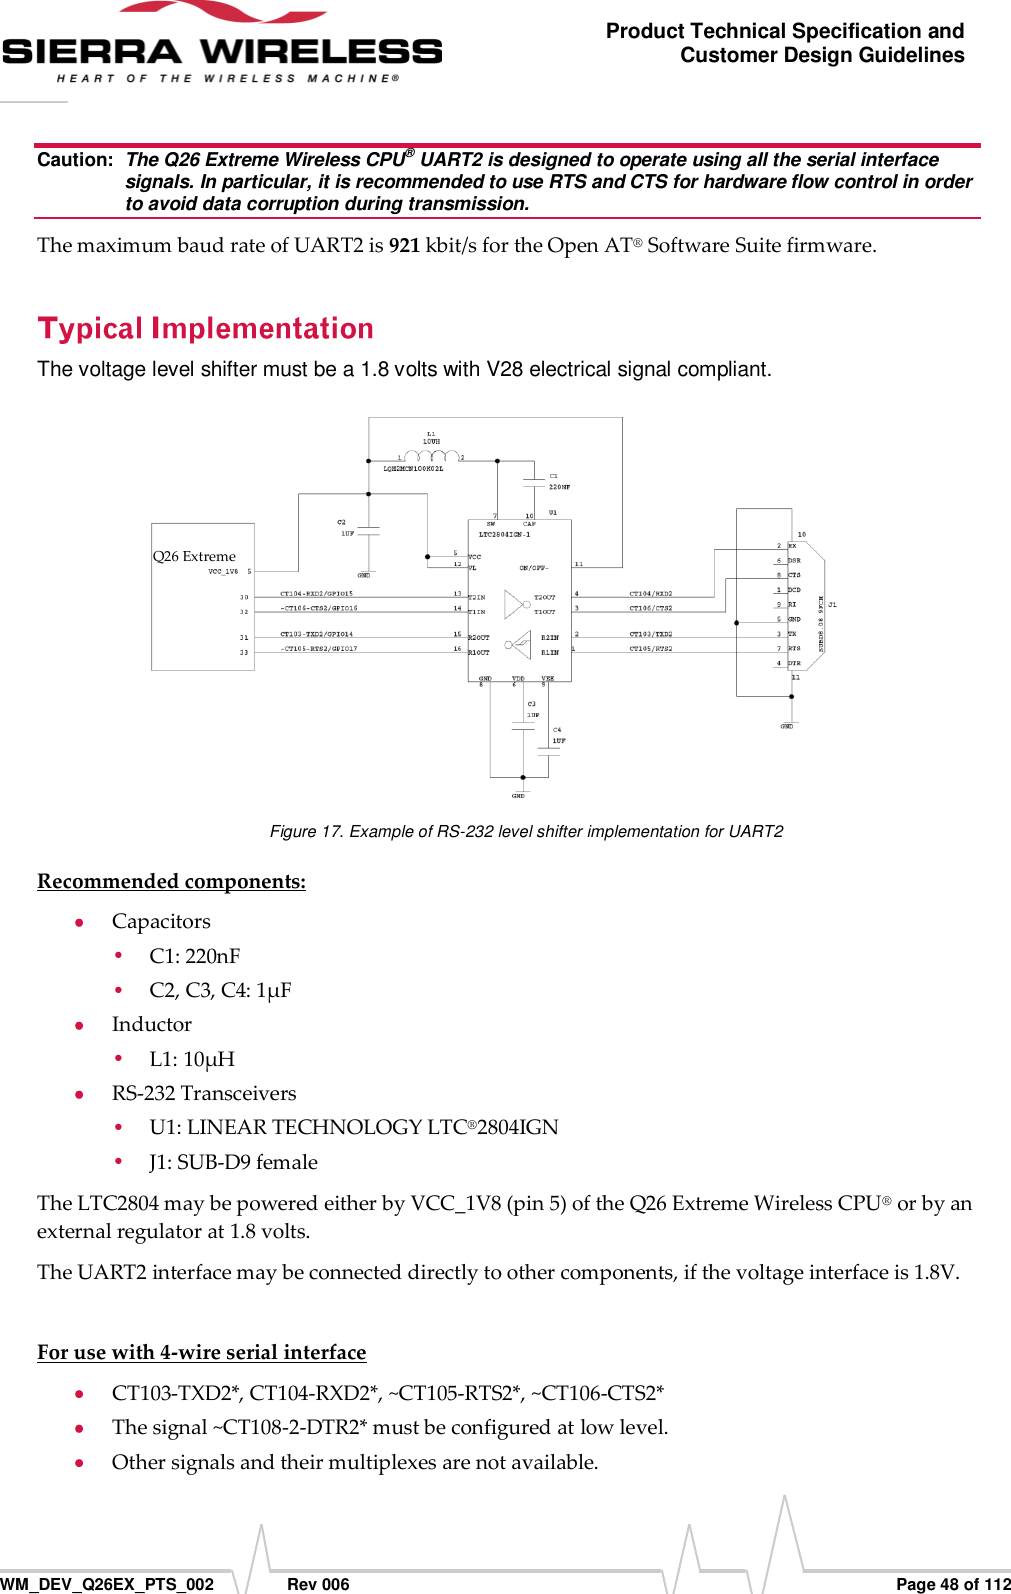      WM_DEV_Q26EX_PTS_002  Rev 006  Page 48 of 112 Product Technical Specification and Customer Design Guidelines Caution:  The Q26 Extreme Wireless CPU® UART2 is designed to operate using all the serial interface signals. In particular, it is recommended to use RTS and CTS for hardware flow control in order to avoid data corruption during transmission. The maximum baud rate of UART2 is 921 kbit/s for the Open AT® Software Suite firmware. The voltage level shifter must be a 1.8 volts with V28 electrical signal compliant.  Figure 17. Example of RS-232 level shifter implementation for UART2 Recommended components:  Capacitors  C1: 220nF   C2, C3, C4: 1μF  Inductor  L1: 10μH  RS-232 Transceivers  U1: LINEAR TECHNOLOGY LTC®2804IGN  J1: SUB-D9 female  The LTC2804 may be powered either by VCC_1V8 (pin 5) of the Q26 Extreme Wireless CPU® or by an external regulator at 1.8 volts. The UART2 interface may be connected directly to other components, if the voltage interface is 1.8V.  For use with 4-wire serial interface   CT103-TXD2*, CT104-RXD2*, ~CT105-RTS2*, ~CT106-CTS2*   The signal ~CT108-2-DTR2* must be configured at low level.  Other signals and their multiplexes are not available. Q26 Extreme                             